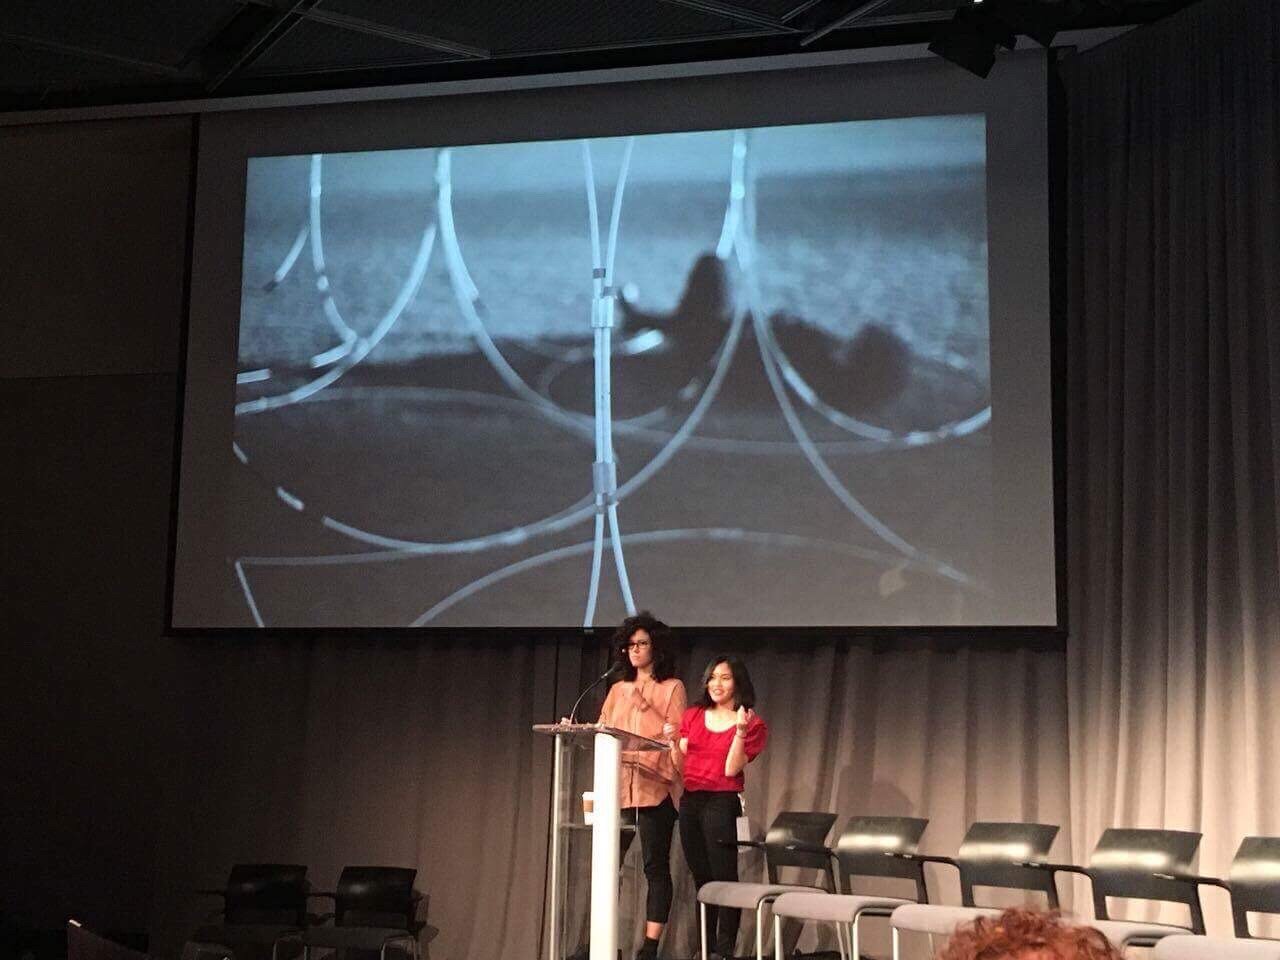  Presenting the project at ACADIA 2017 in the MIT Media Lab with collaborator MyDung Nguyen. 